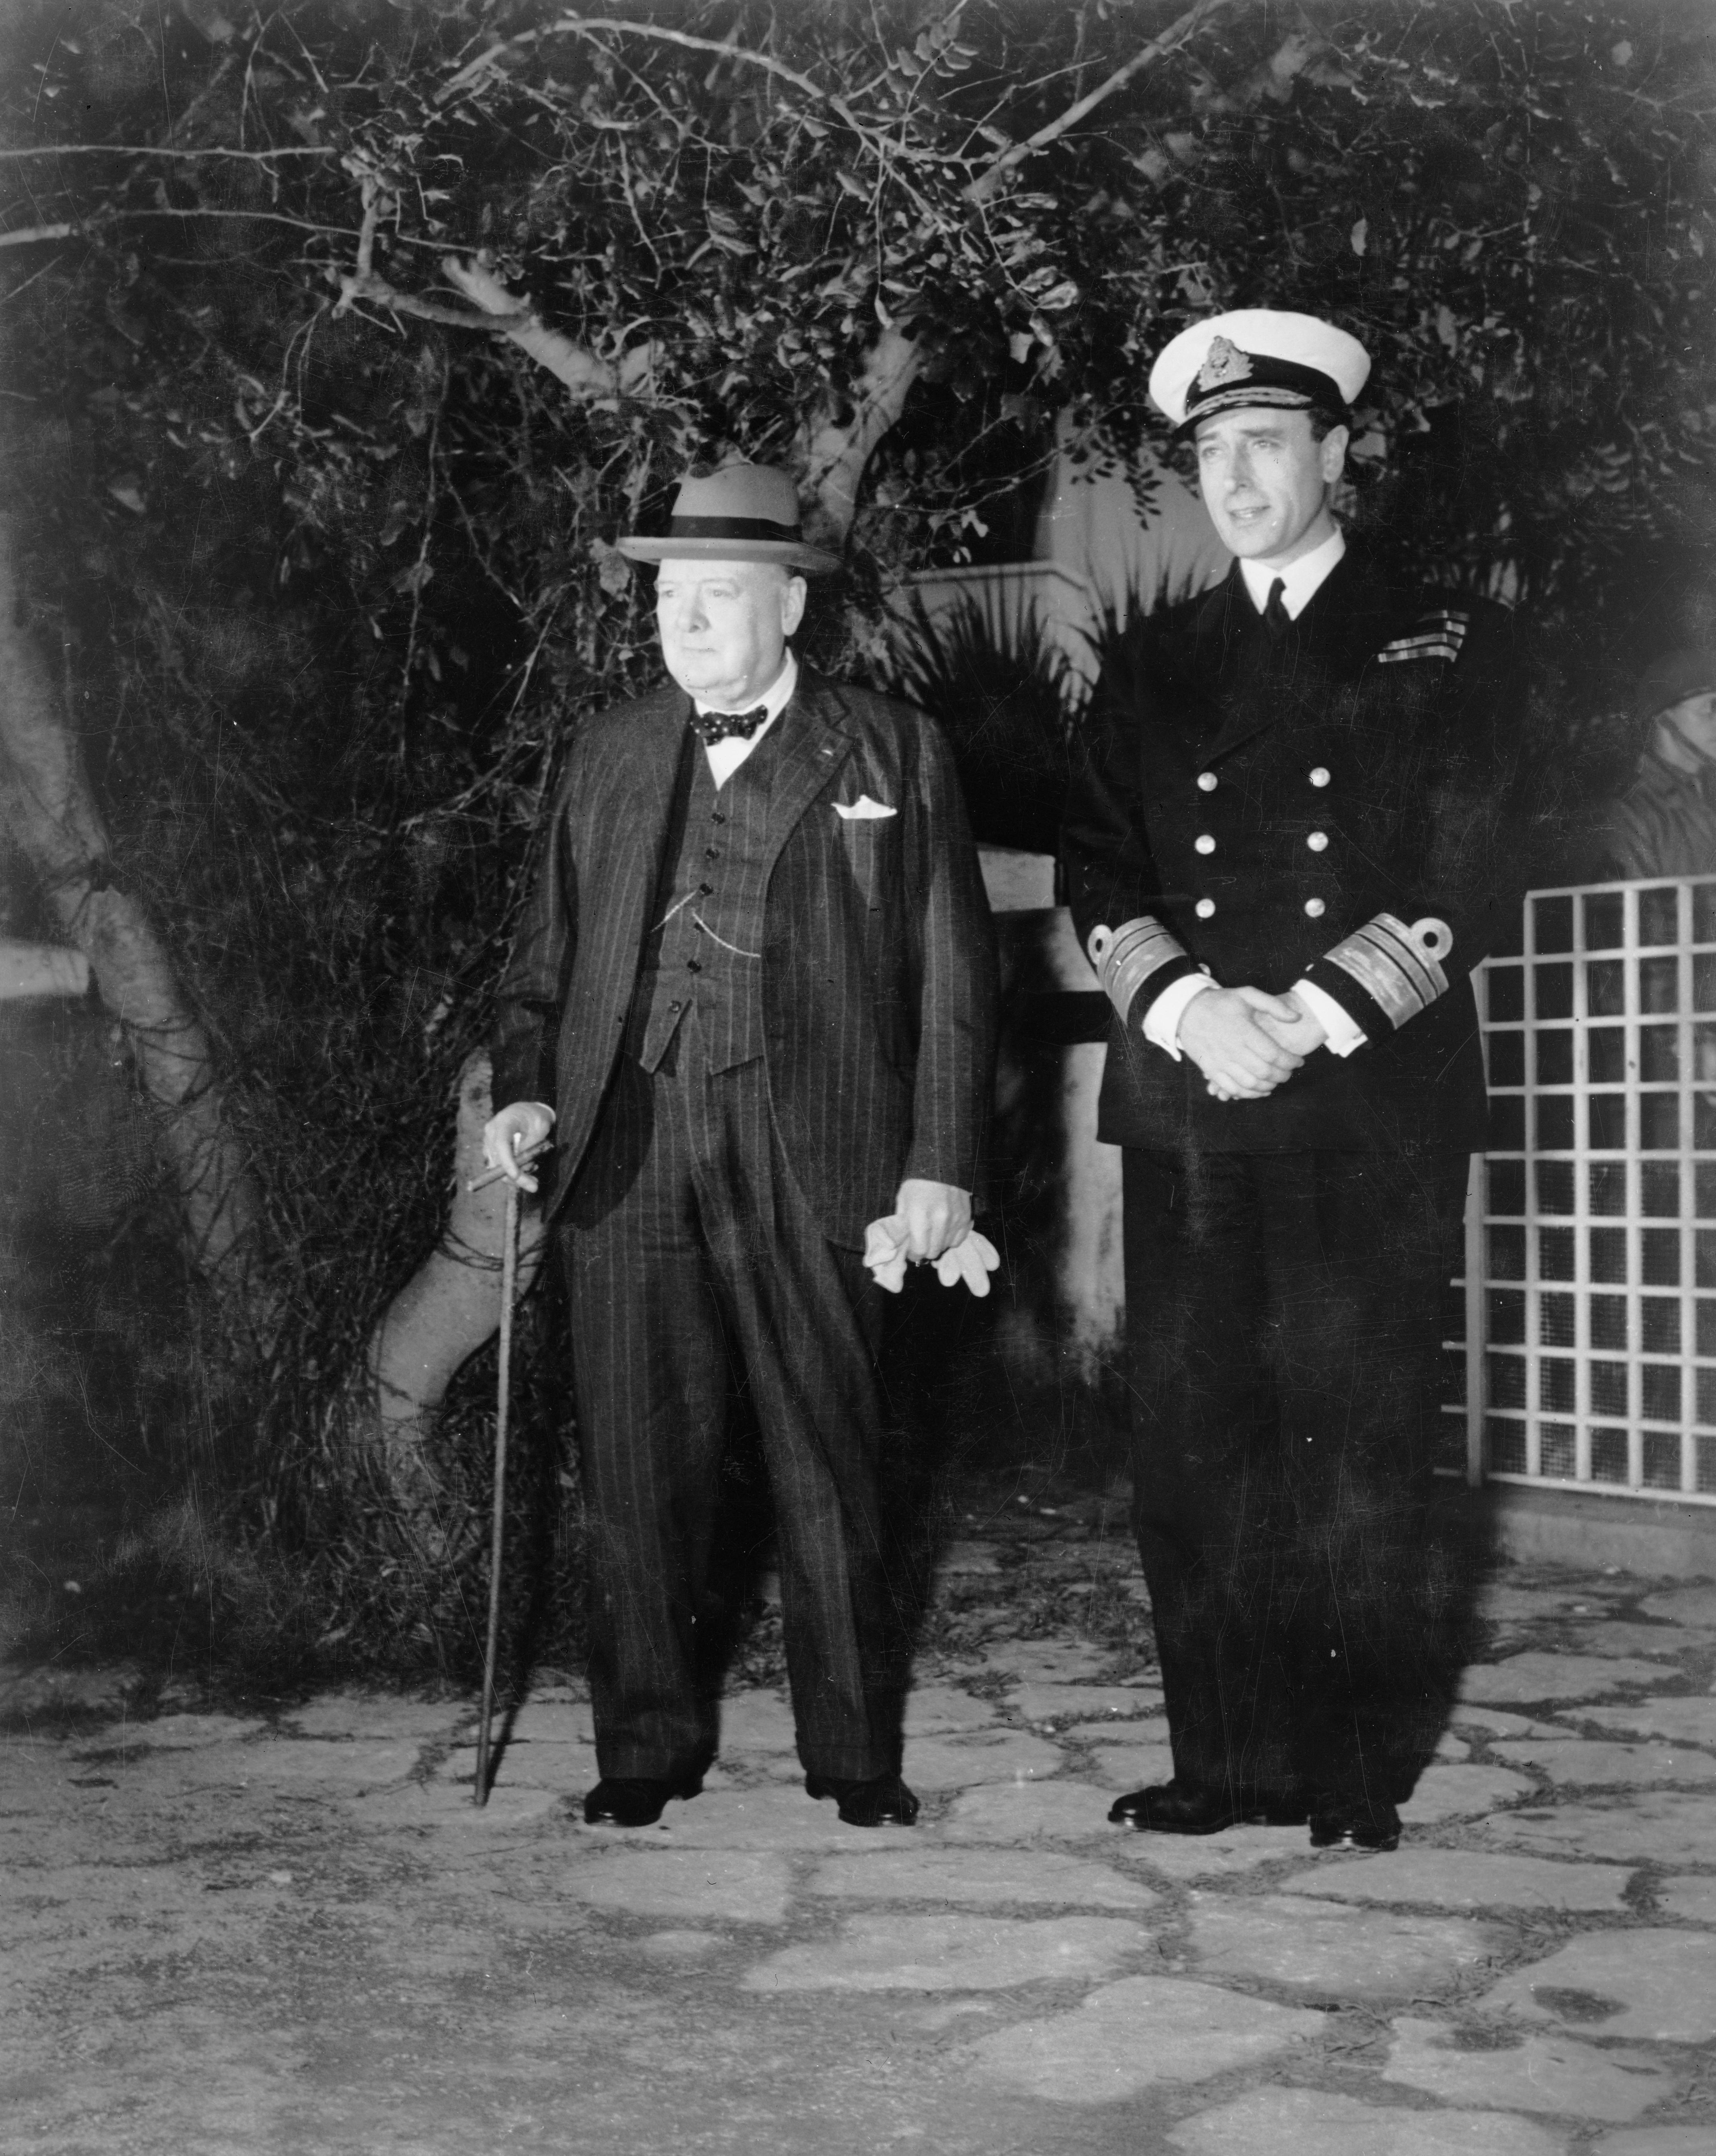 Winston Churchill and Vice Admiral Lord Louis Mountbatten in front of Churchill’s residence in Casablanca, Morocco for the Casablanca Conference, Jan 1943.